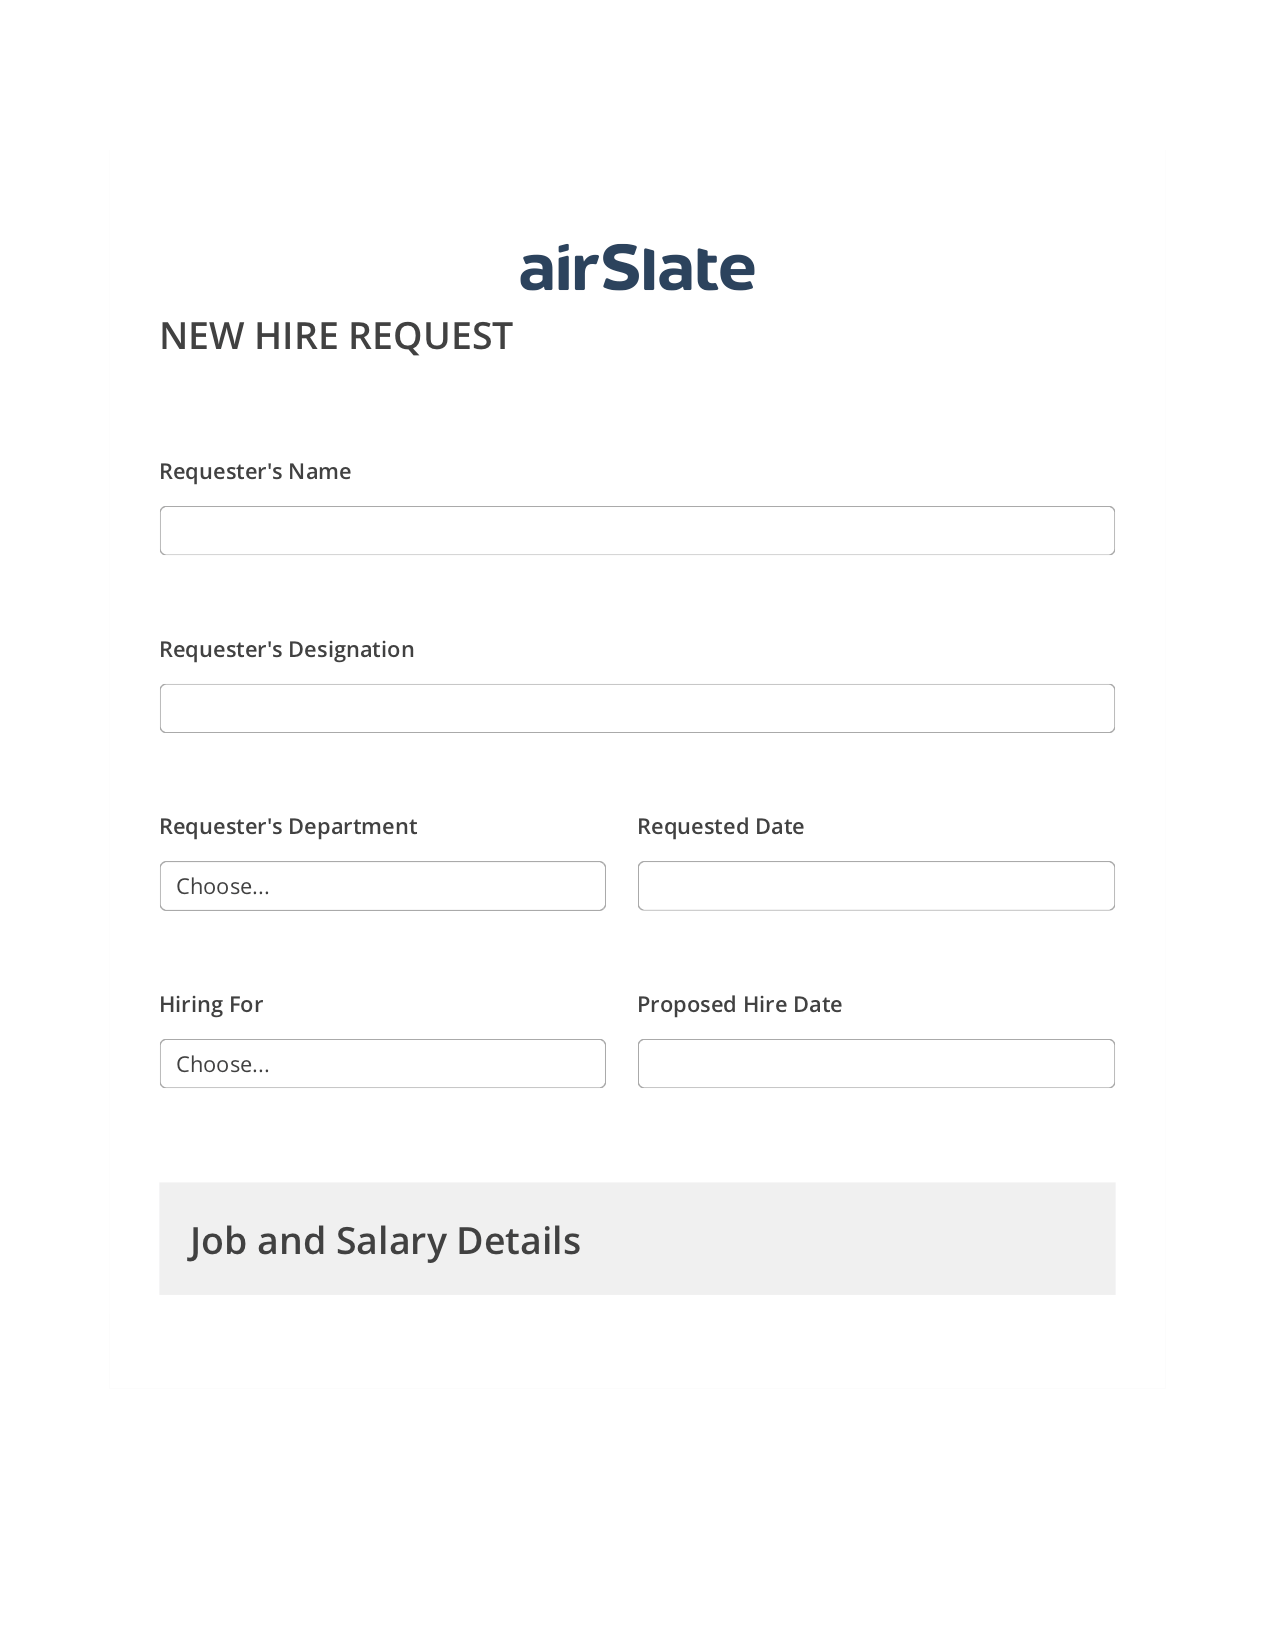 Multirole Hiring Request Workflow Pre-fill Dropdowns from Airtable, Create slate bot, Export to Excel 365 Bot